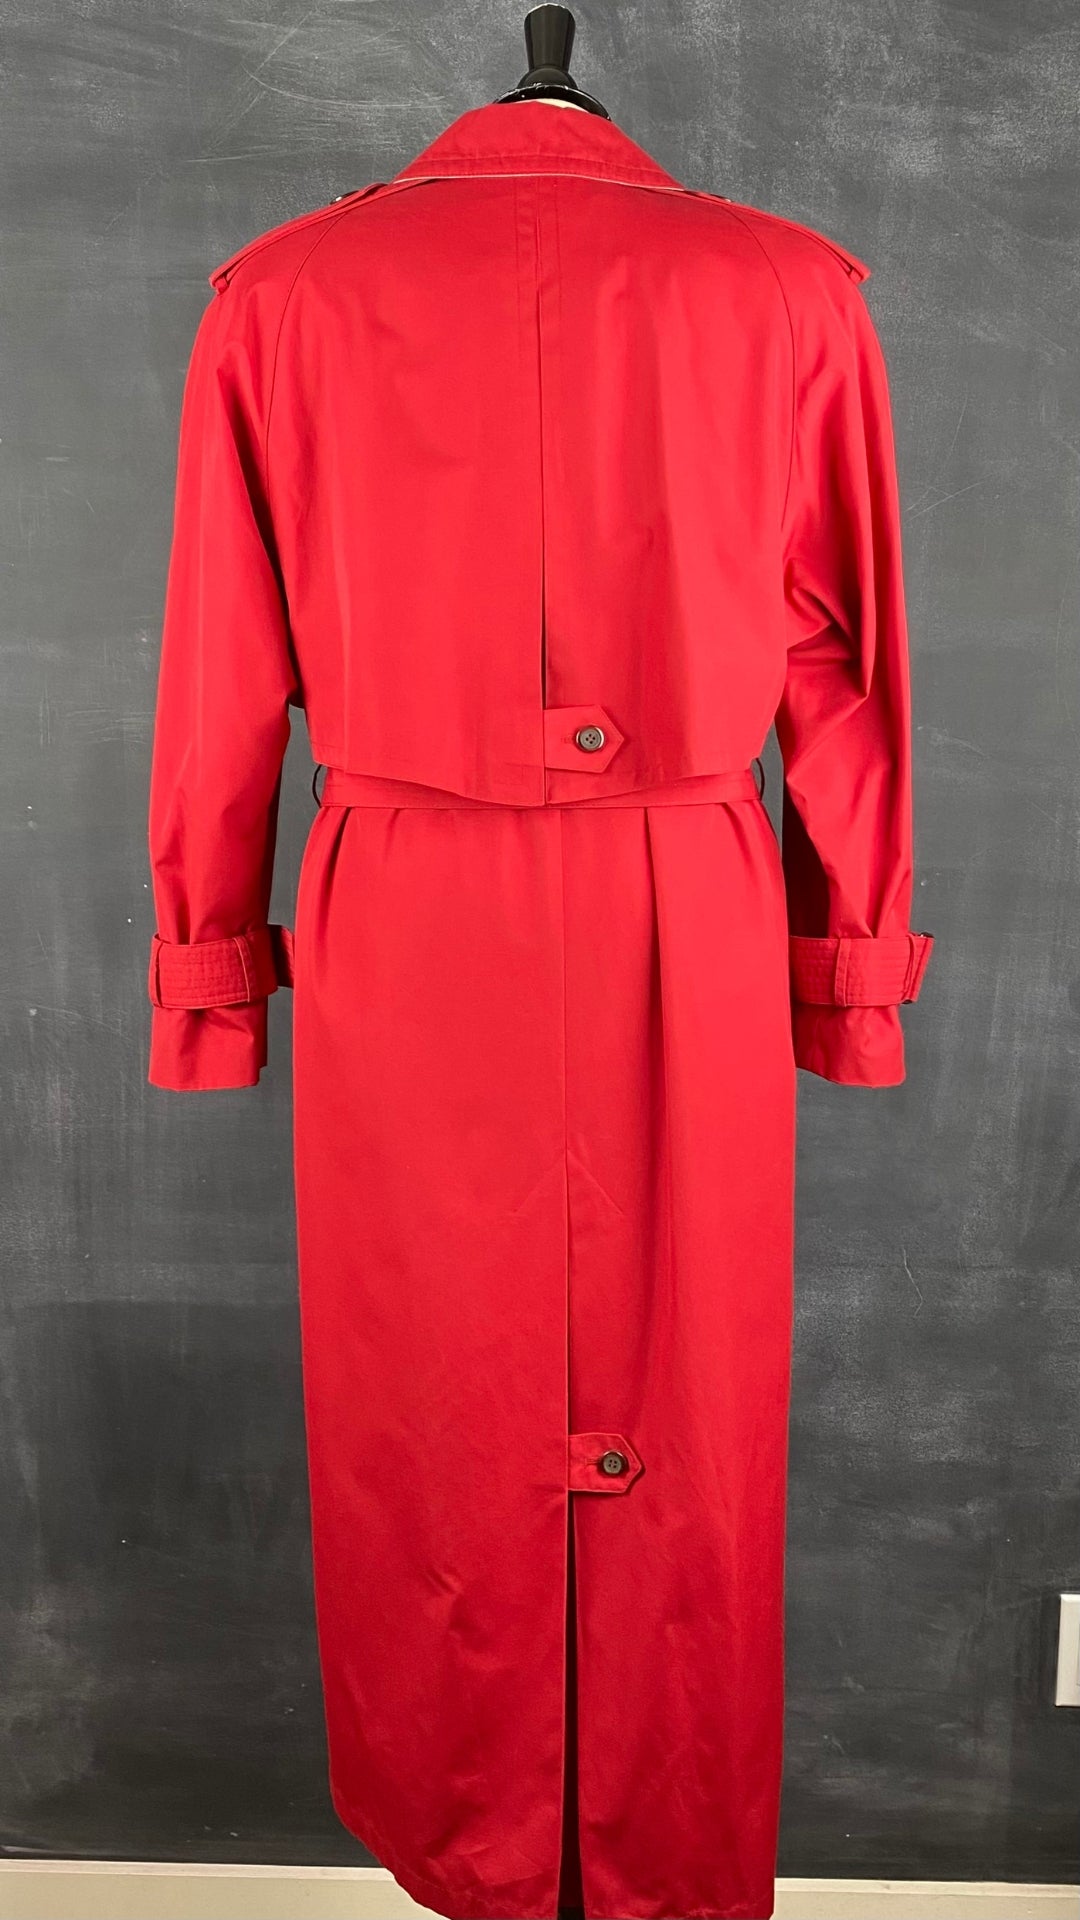 Manteau long vintage style trench rouge, taille small/medium. Vue de dos.